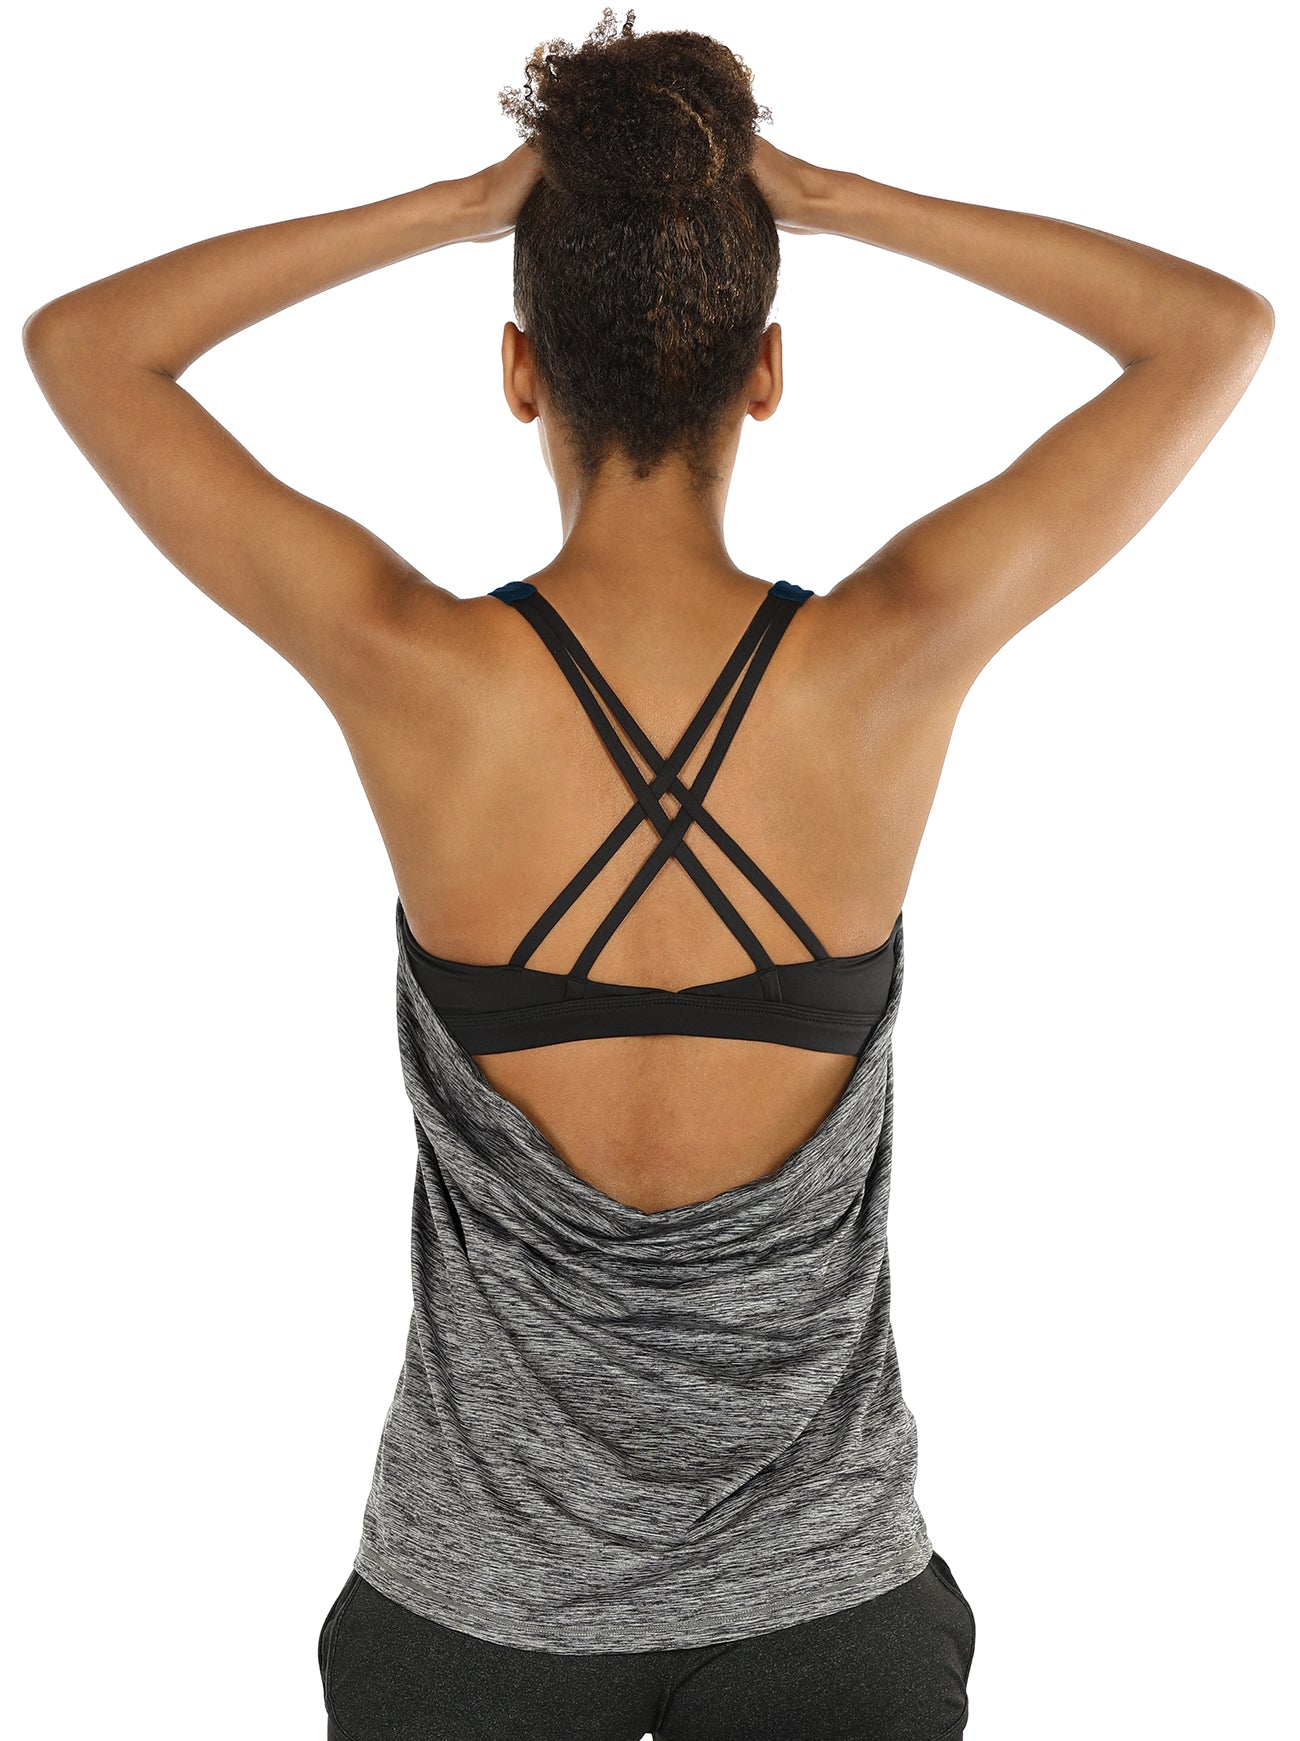 Stylish Yoga Tops Workouts Clothes Activewear Built in Bra Tank Tops f -  Everyday Crosstrain